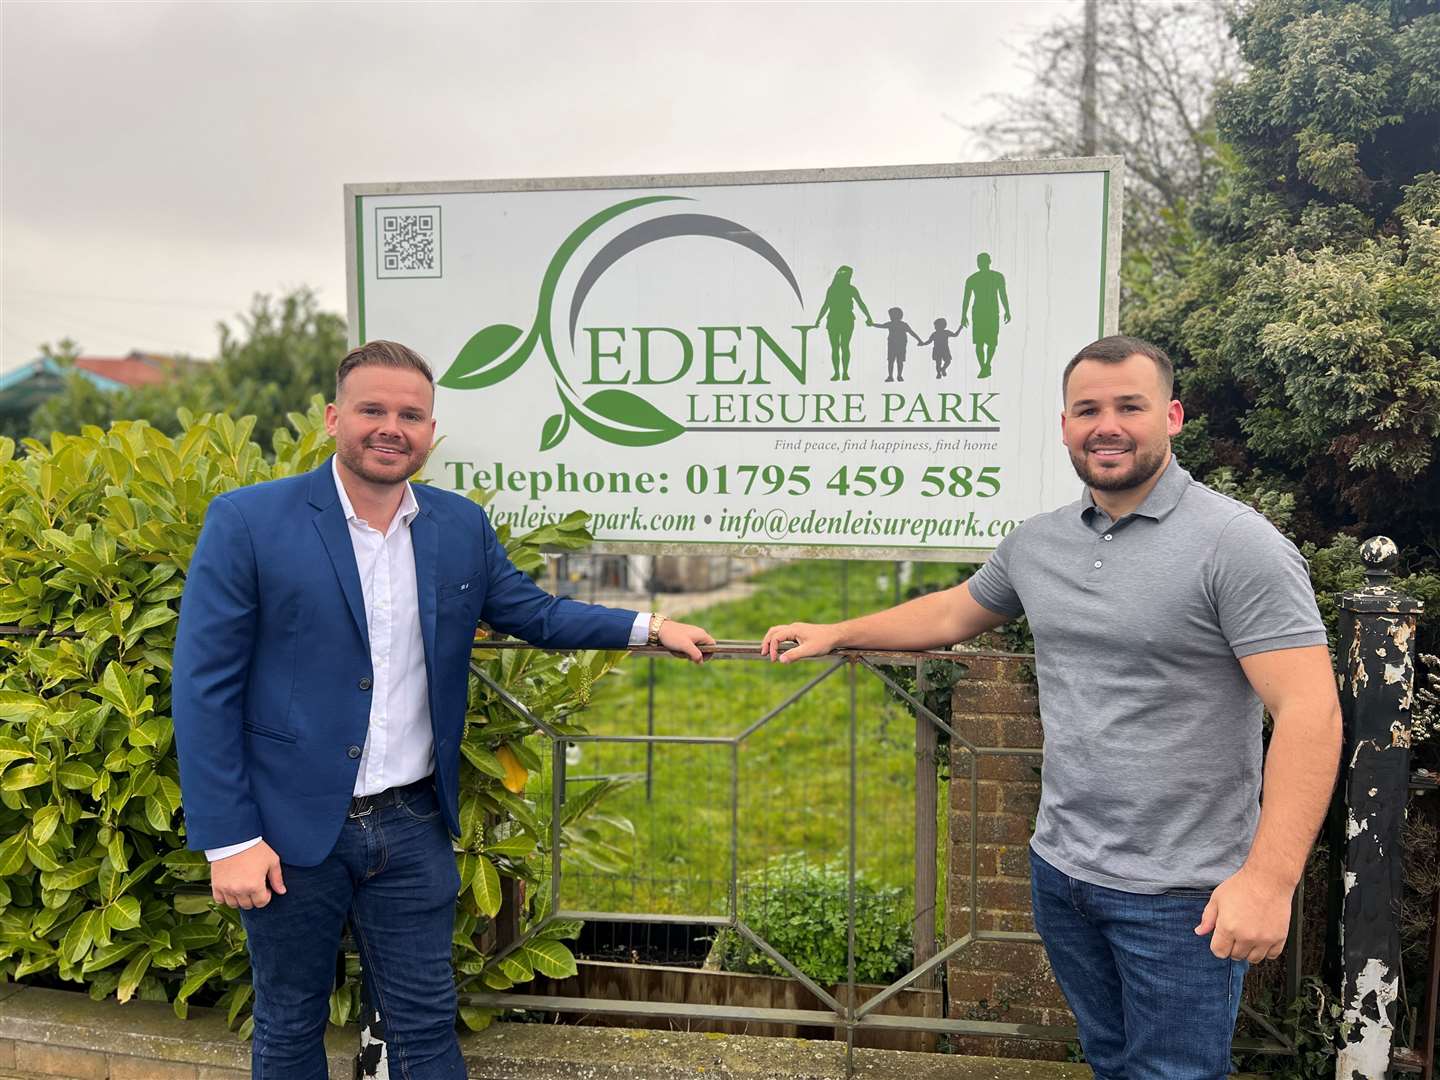 John and Bernard Saunders, the new owners of the Eden Leisure Park in Eastchurch